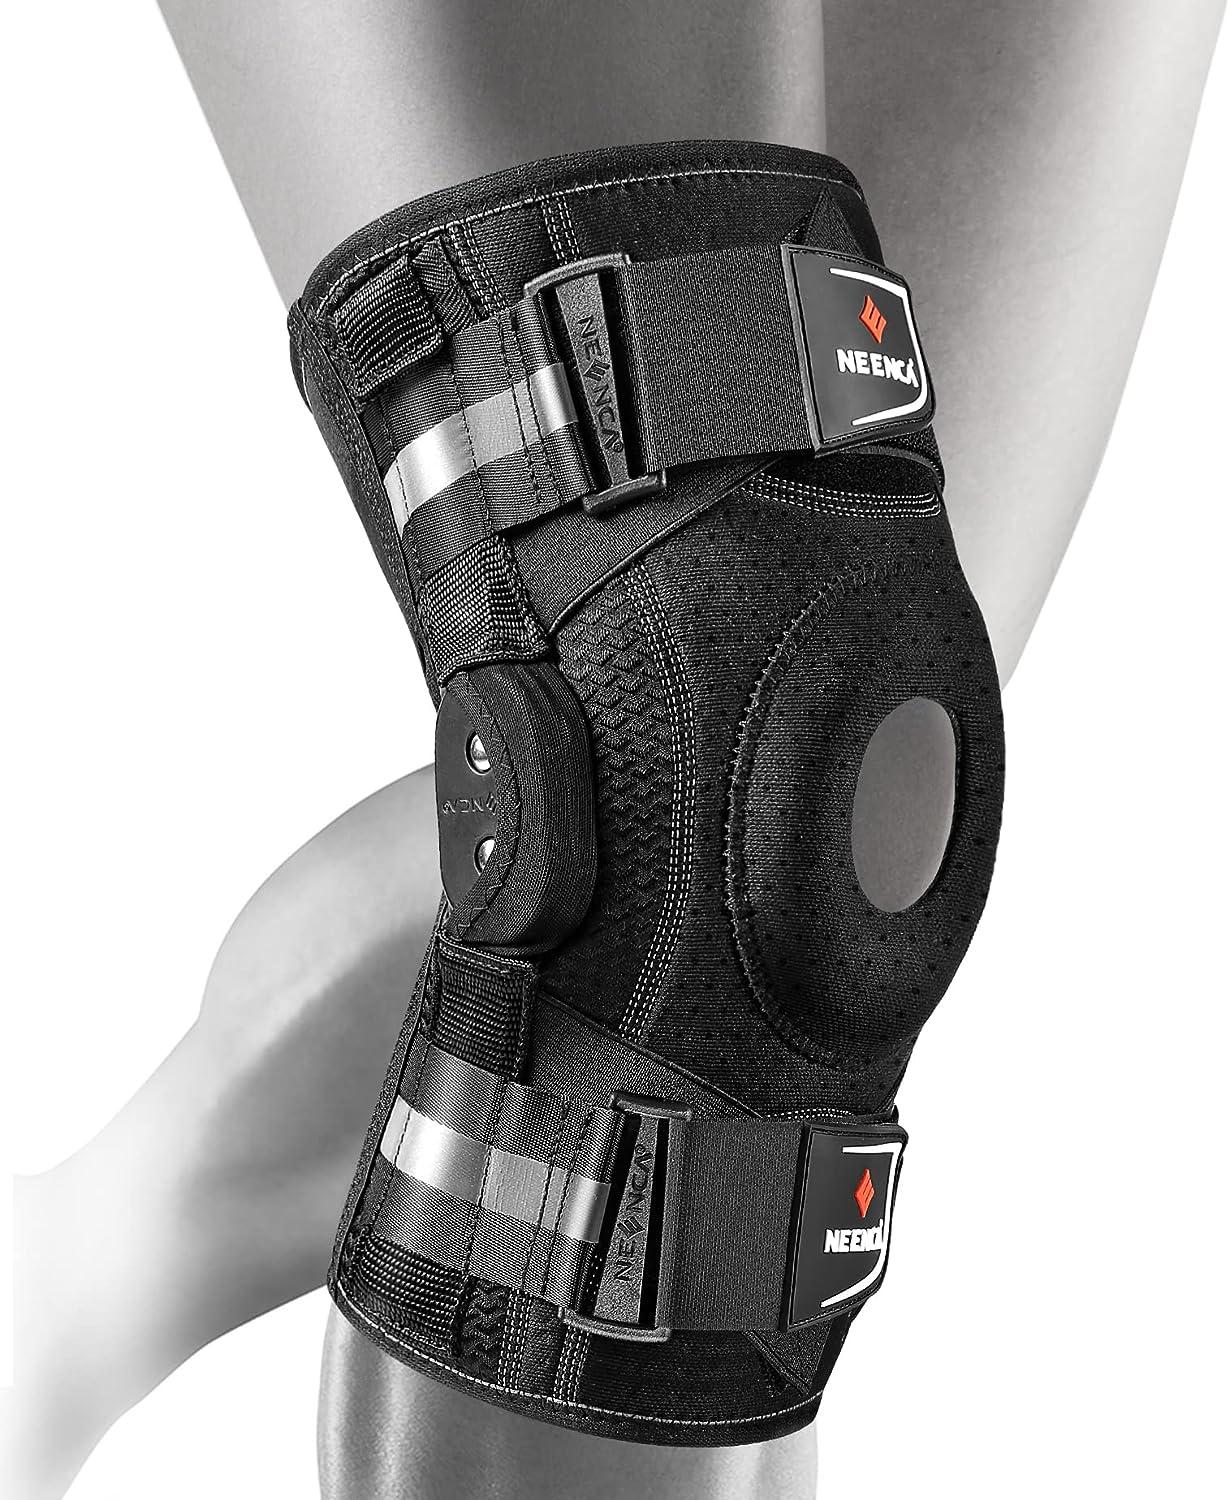 NEENCA Professional Hinged Knee Brace Medical Knee Support with Patented  X-Strap Fixing System. Best for Knee Pain Relief Arthritis Meniscus Tear  Injury Recovery ACL MCL PCL Sports. Men & Women Large Black 